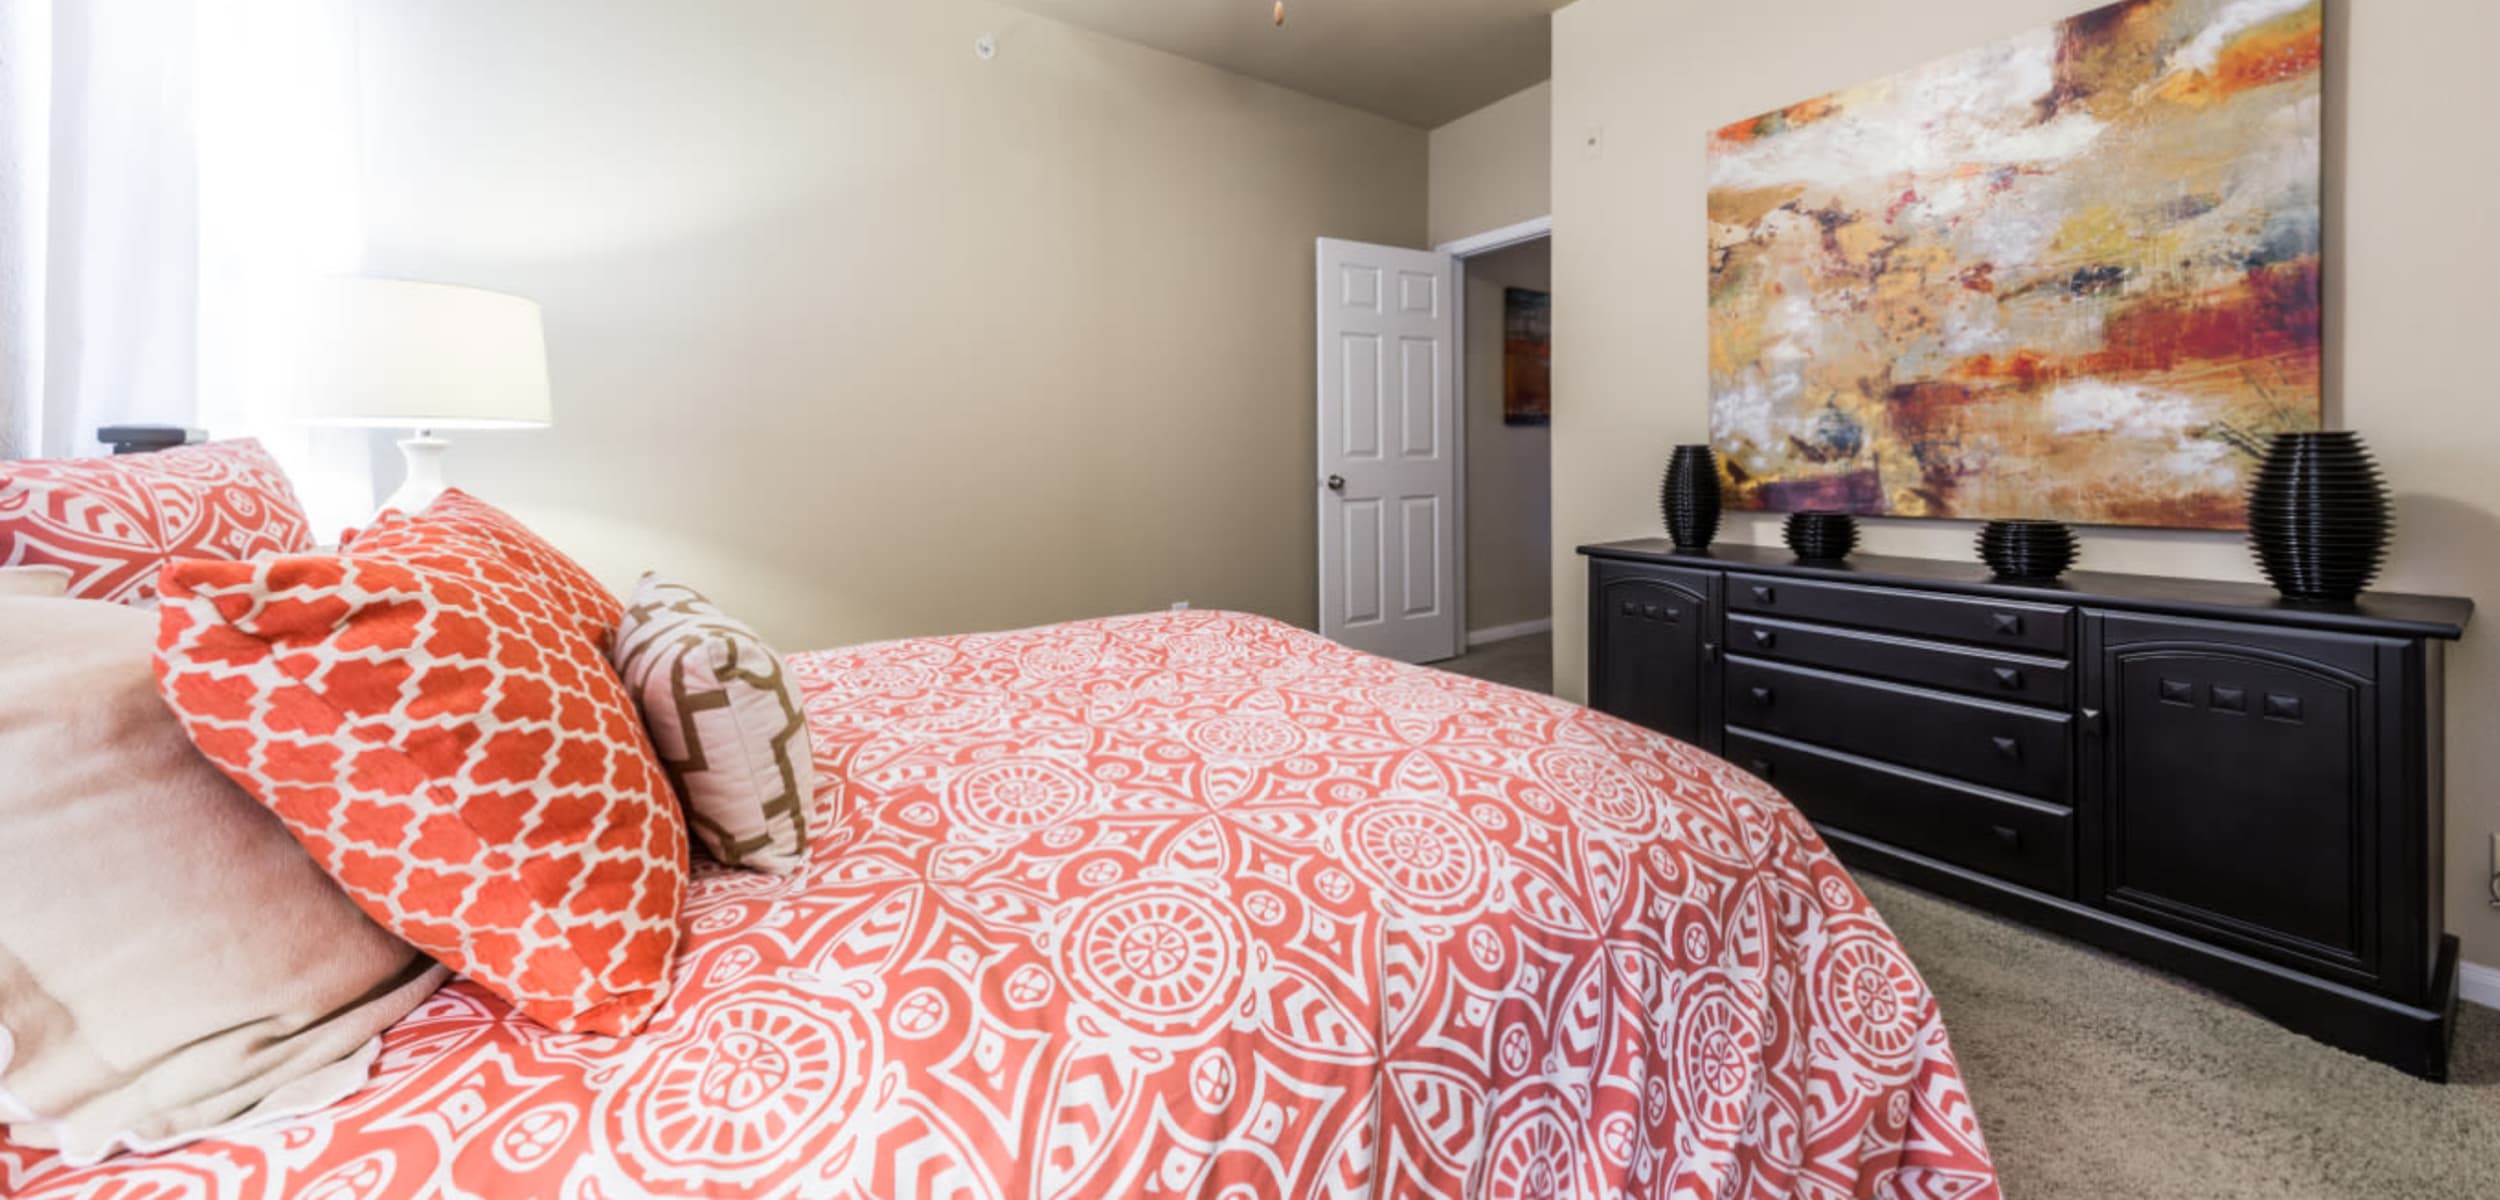 Spacious bedroom with carpet and ceiling fan at Marquis at Stonegate in Fort Worth, Texas